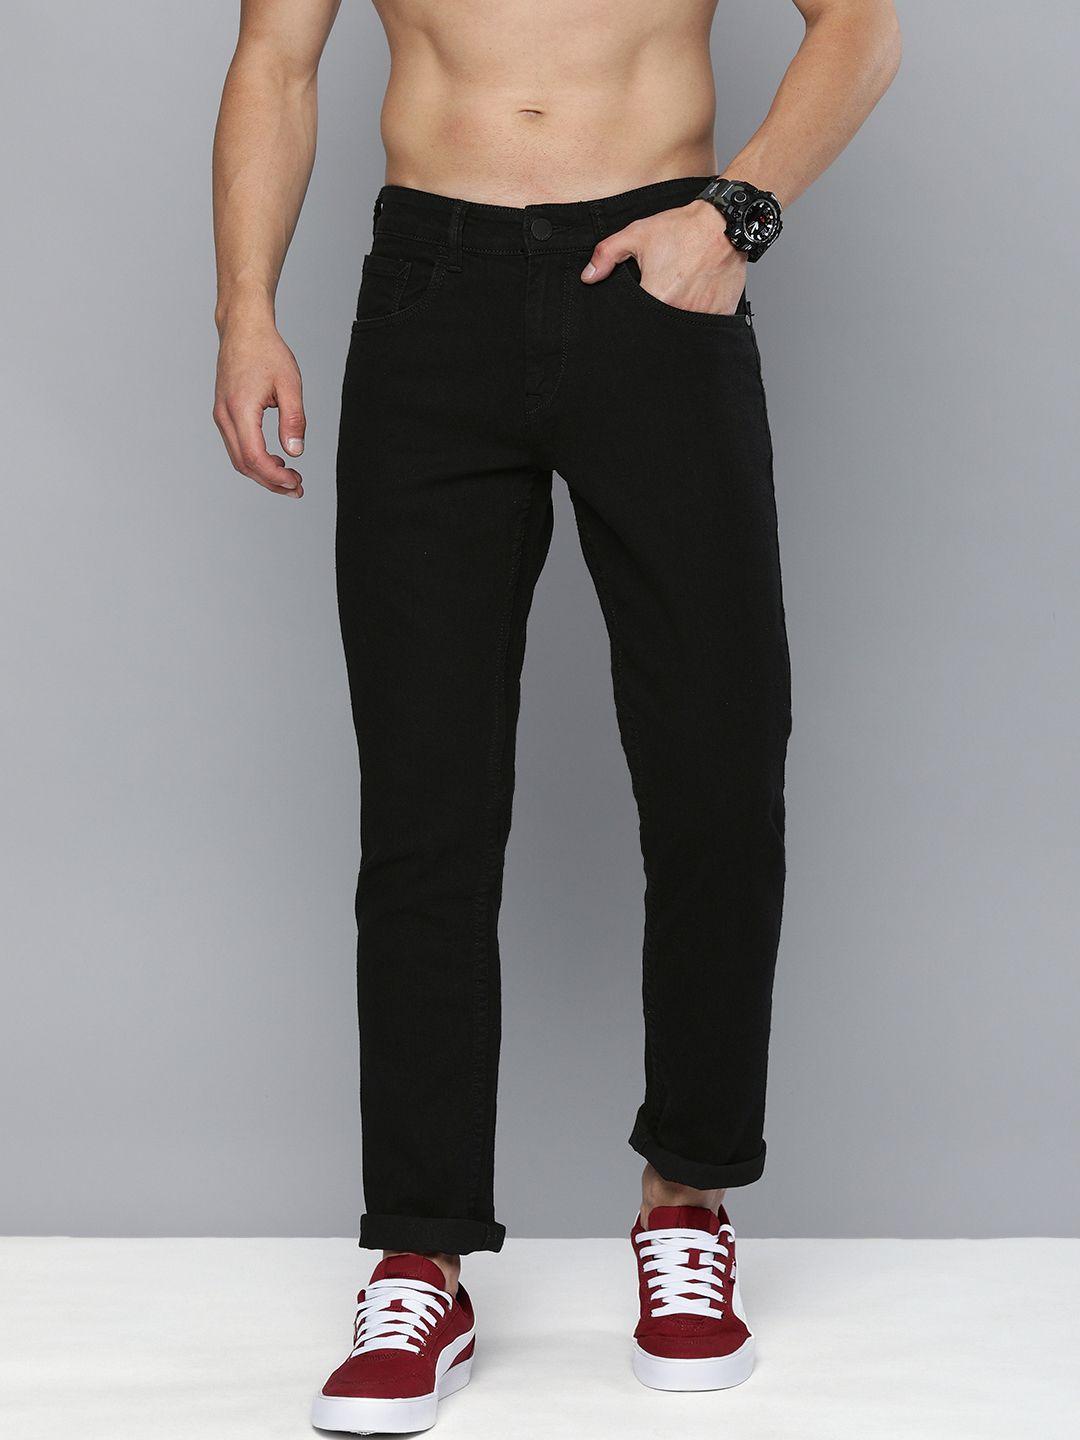 here&now men black regular fit clean look mid rise stretchable jeans